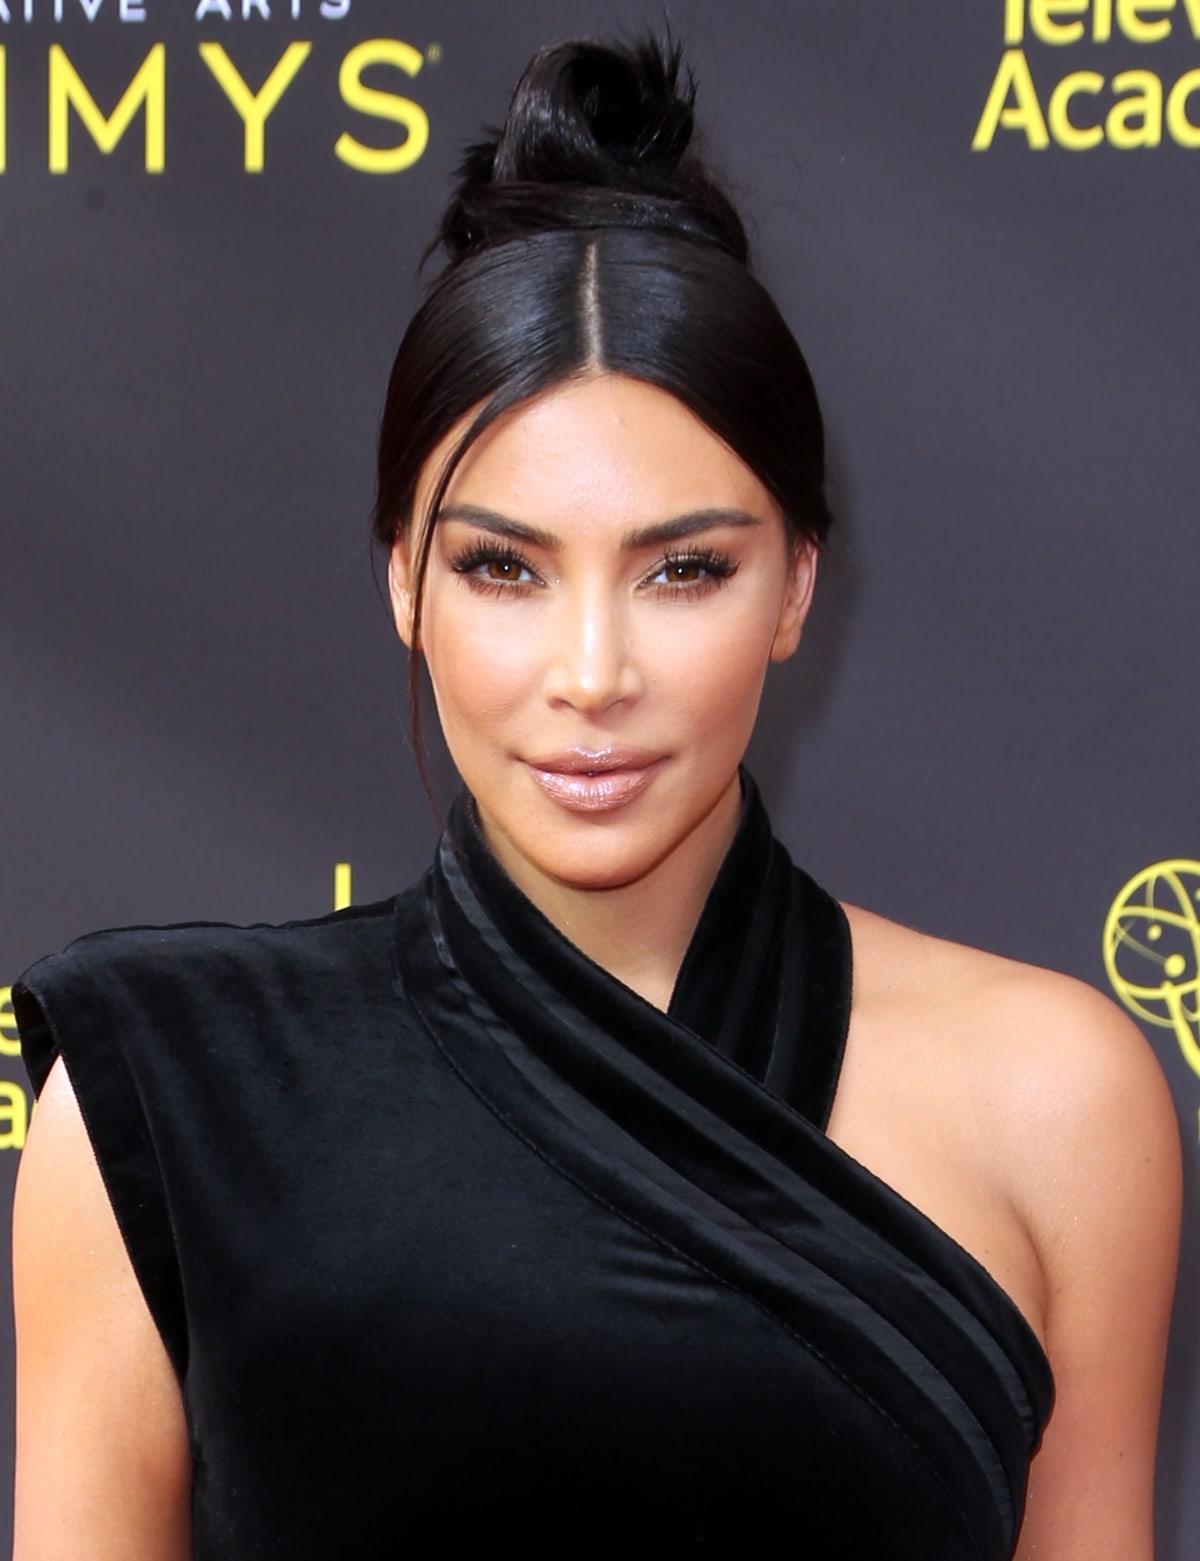 Kim Kardashian is learning through an apprenticeship to become a lawyer